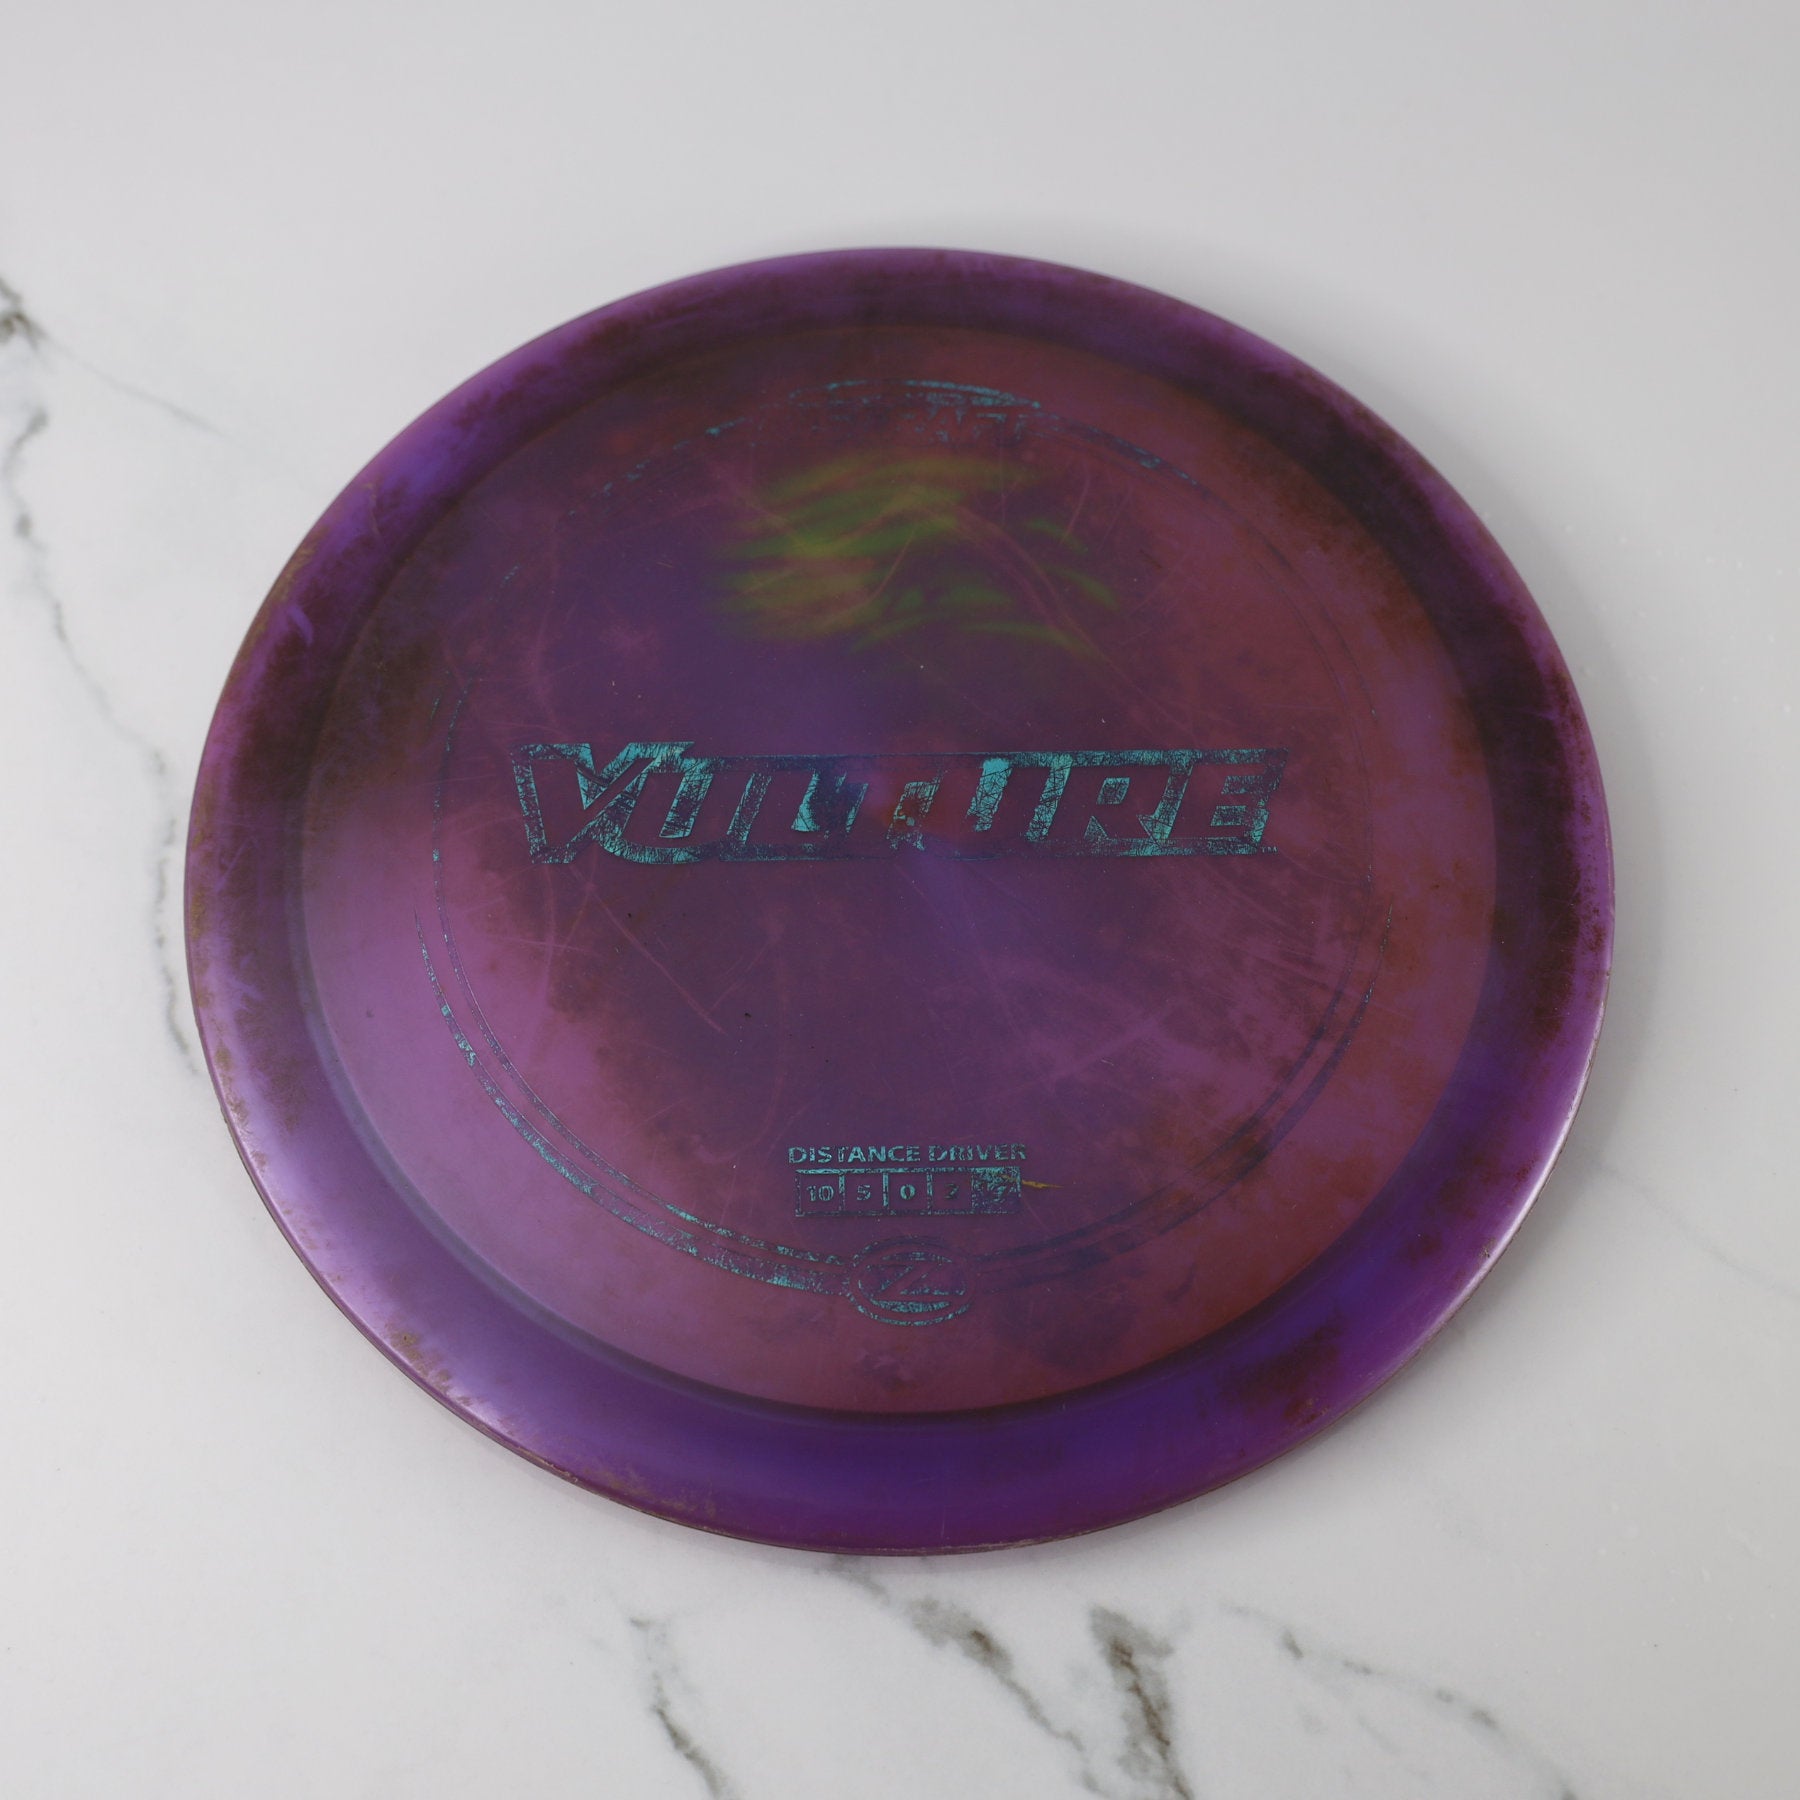 Used Discraft Z Vulture